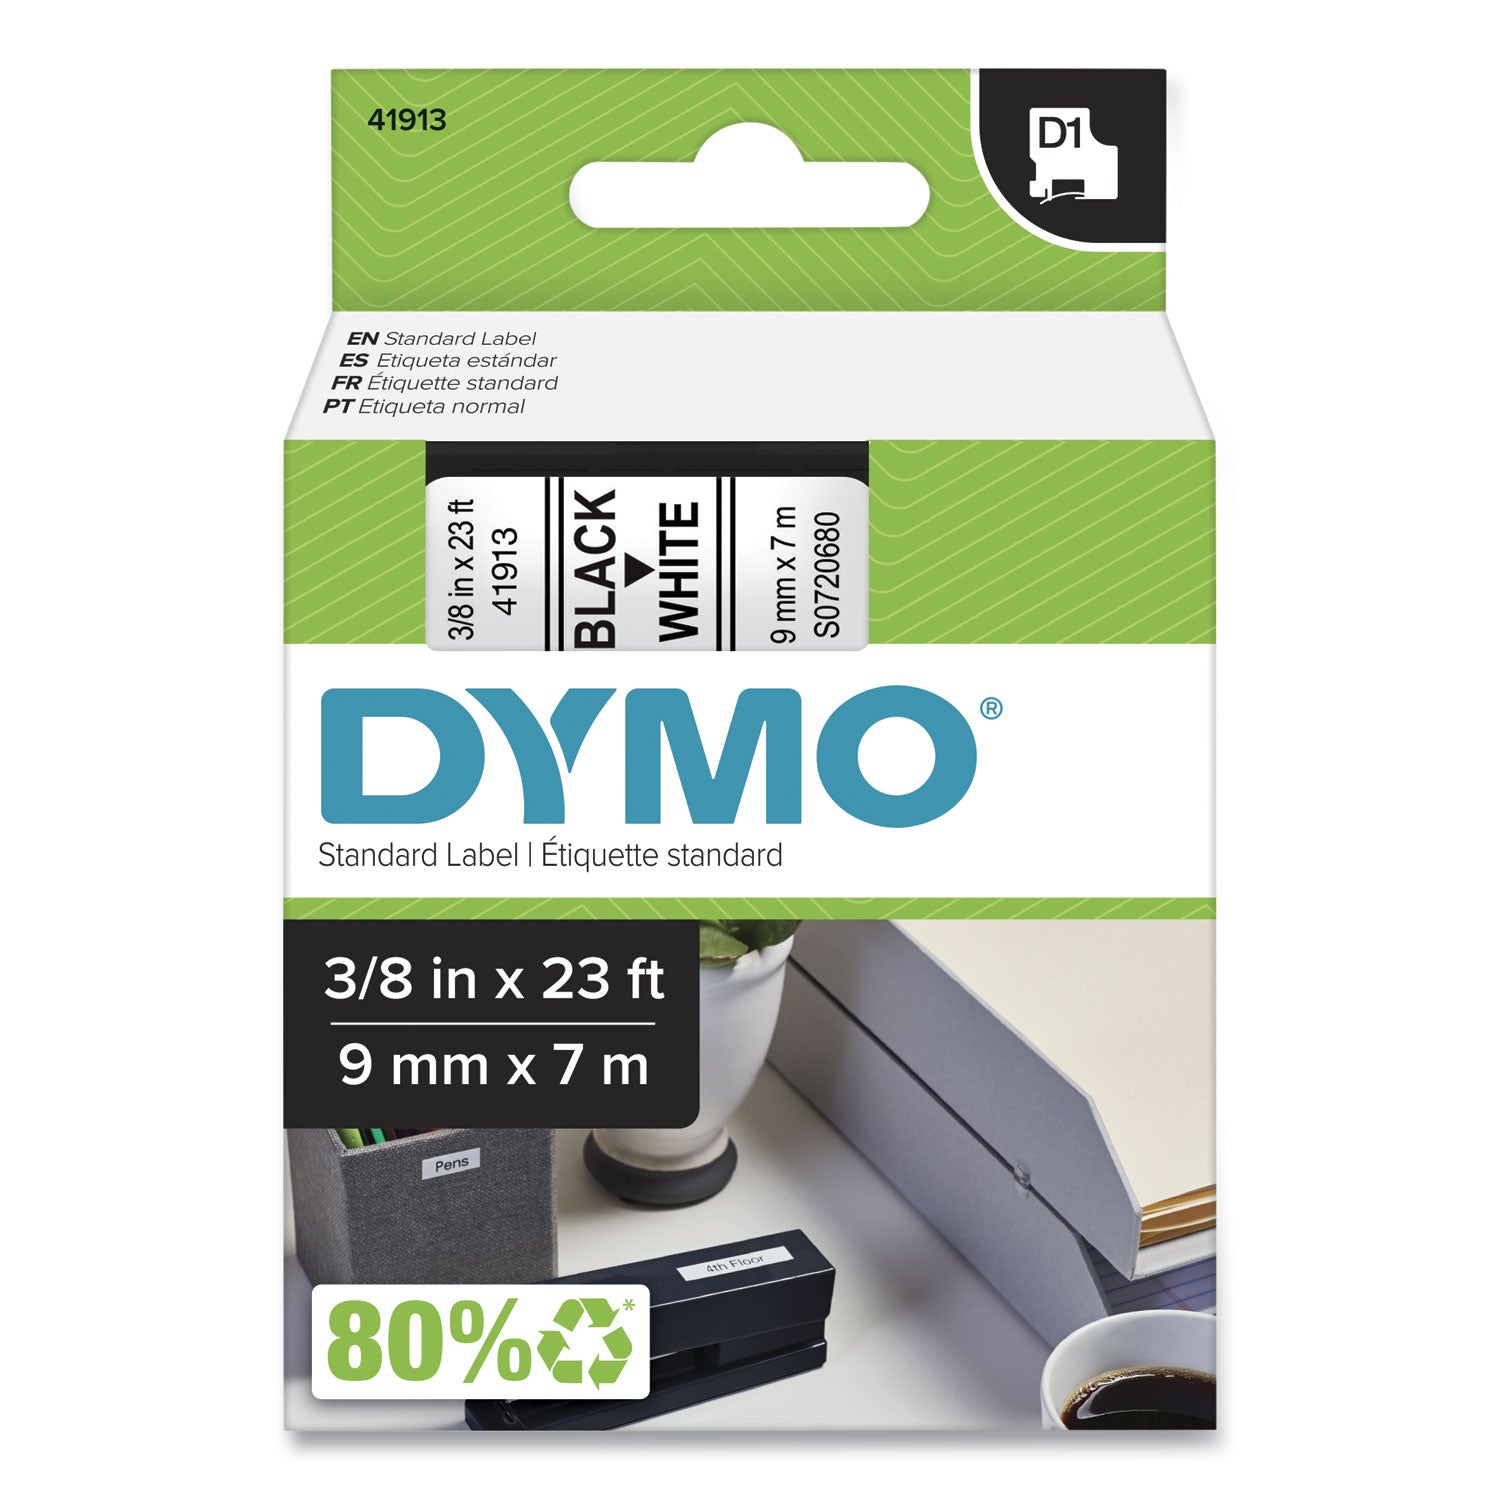 D1 High-Performance Polyester Removable Label Tape, 0.37" x 23 ft, Black on White - 